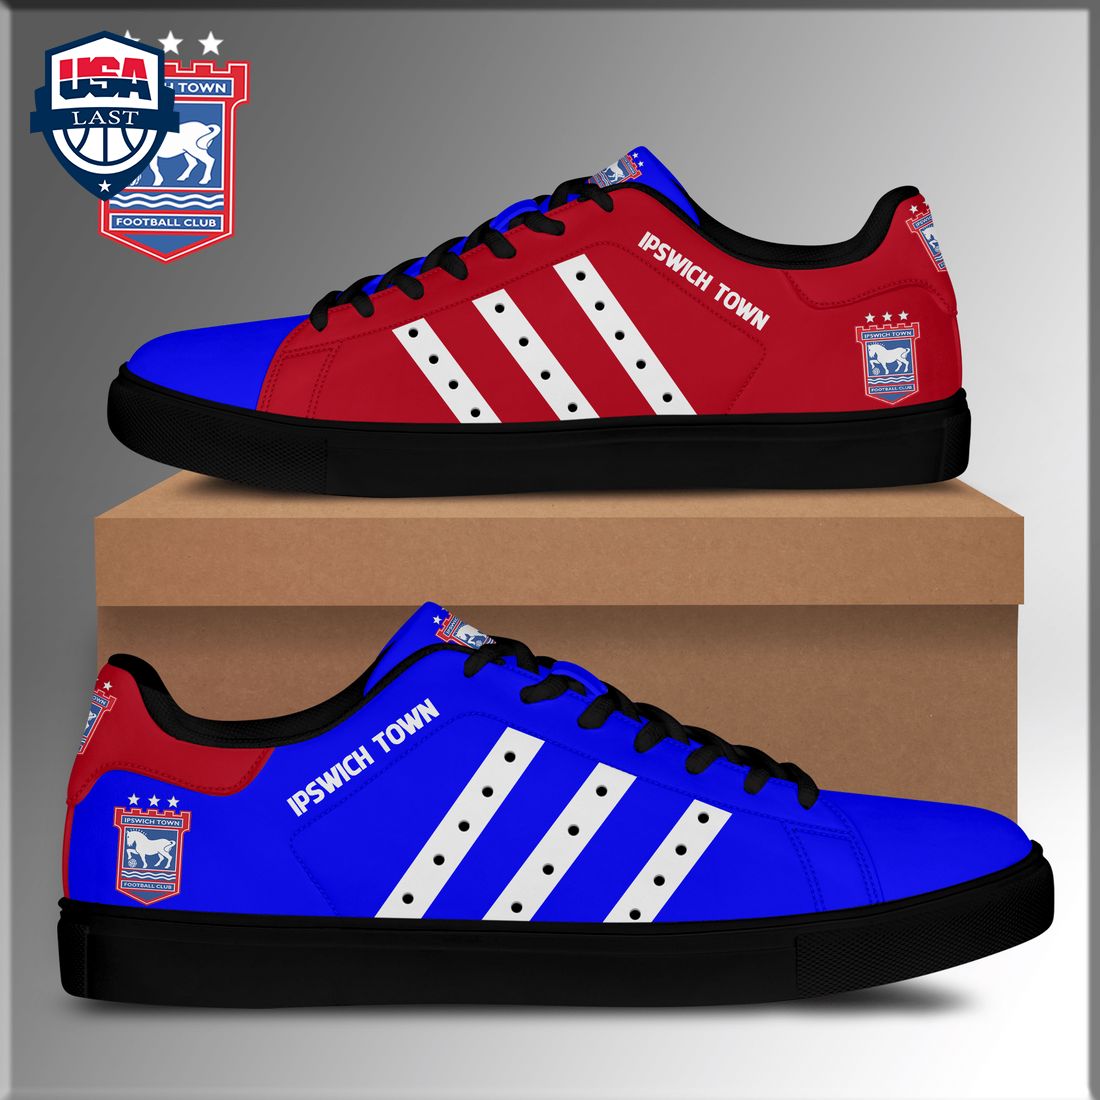 ipswich-town-fc-white-stripes-style-4-stan-smith-low-top-shoes-1-5aA1T.jpg